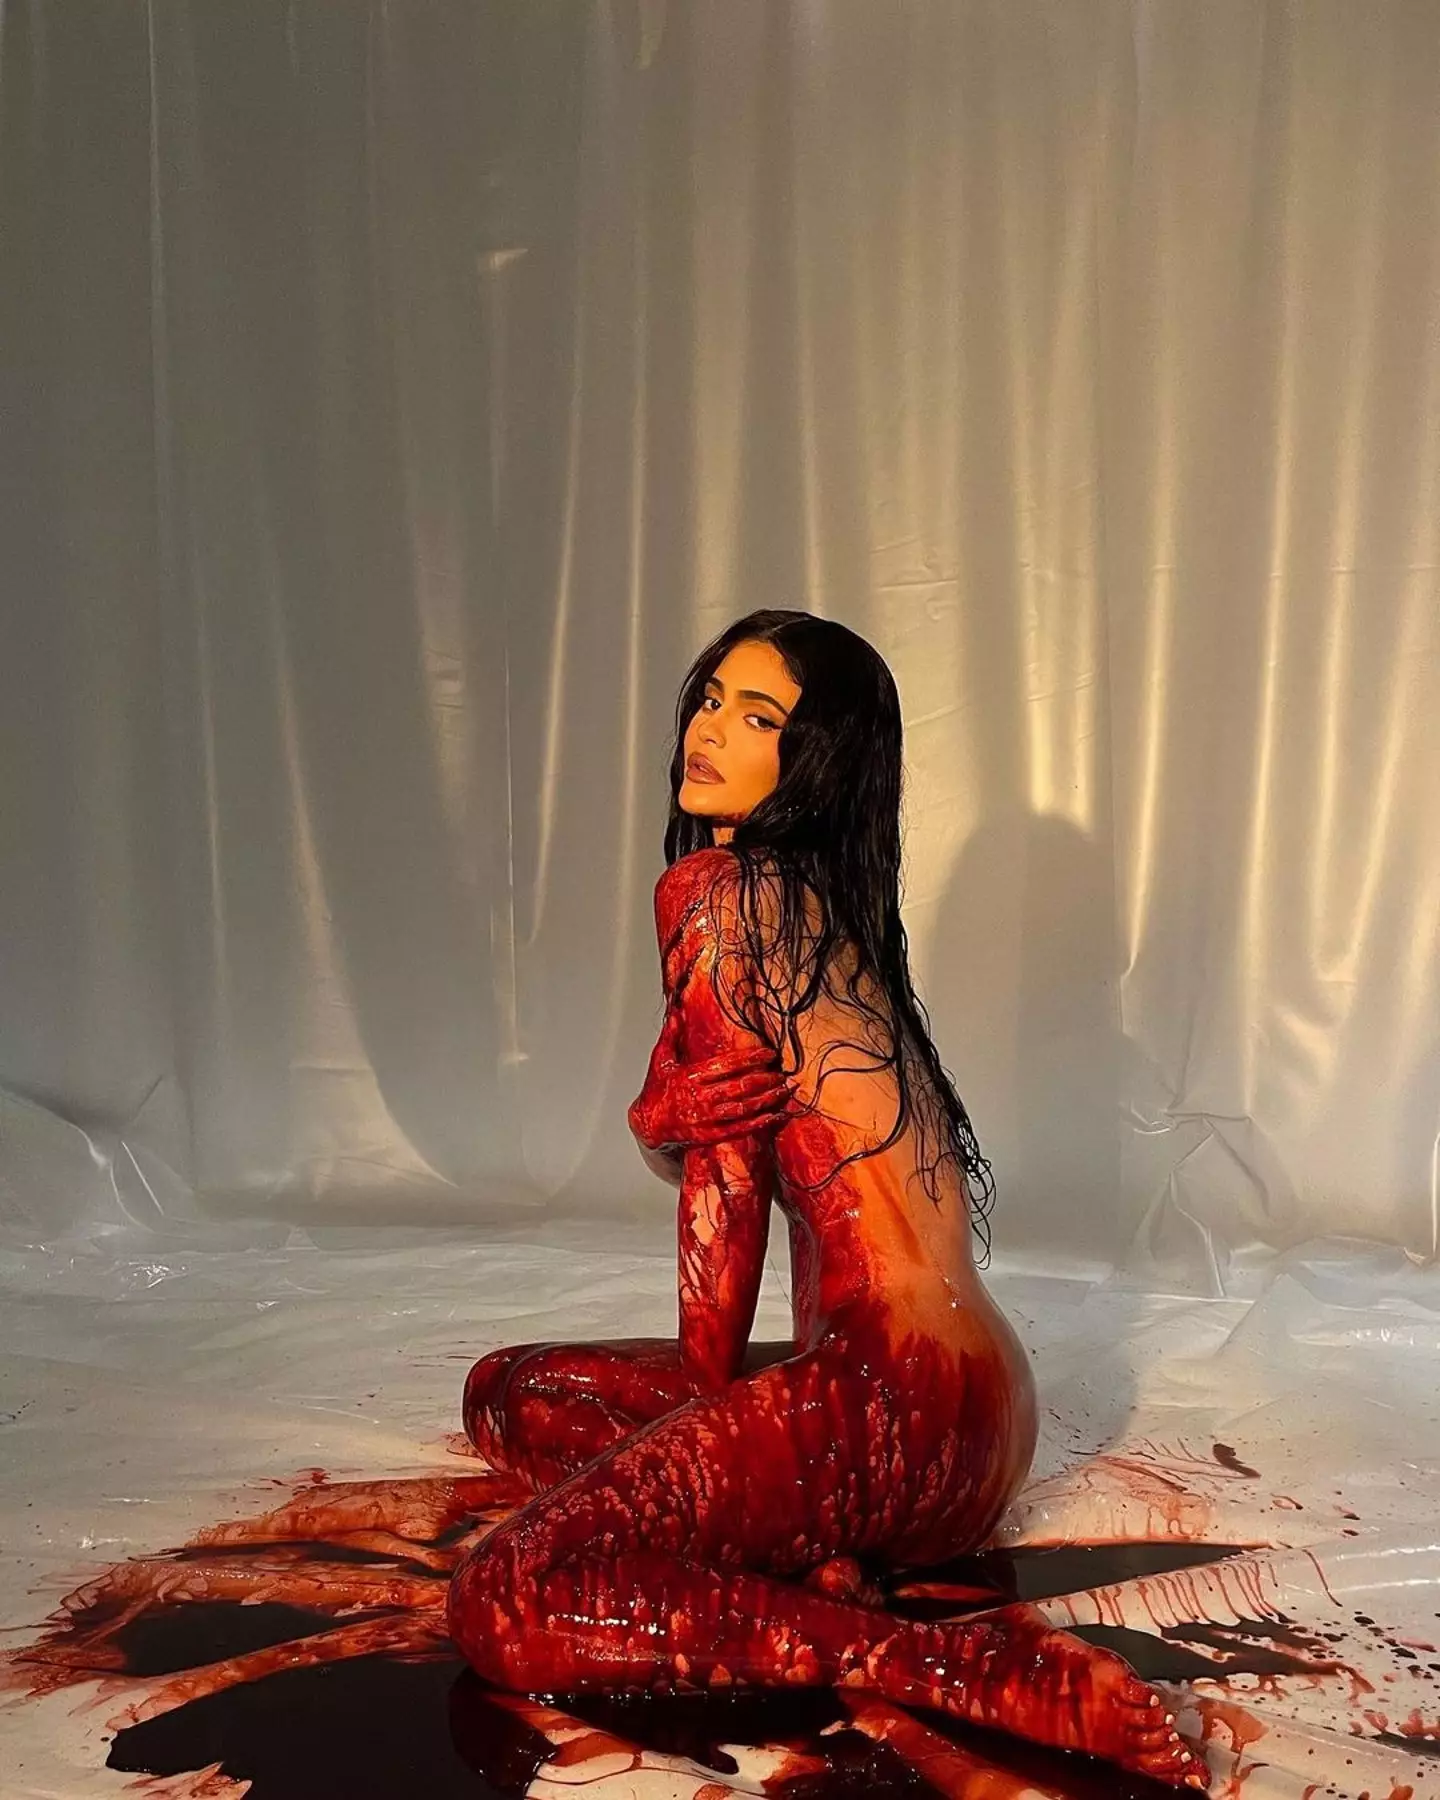 Kylie posted nude pictures of herself covered in blood (